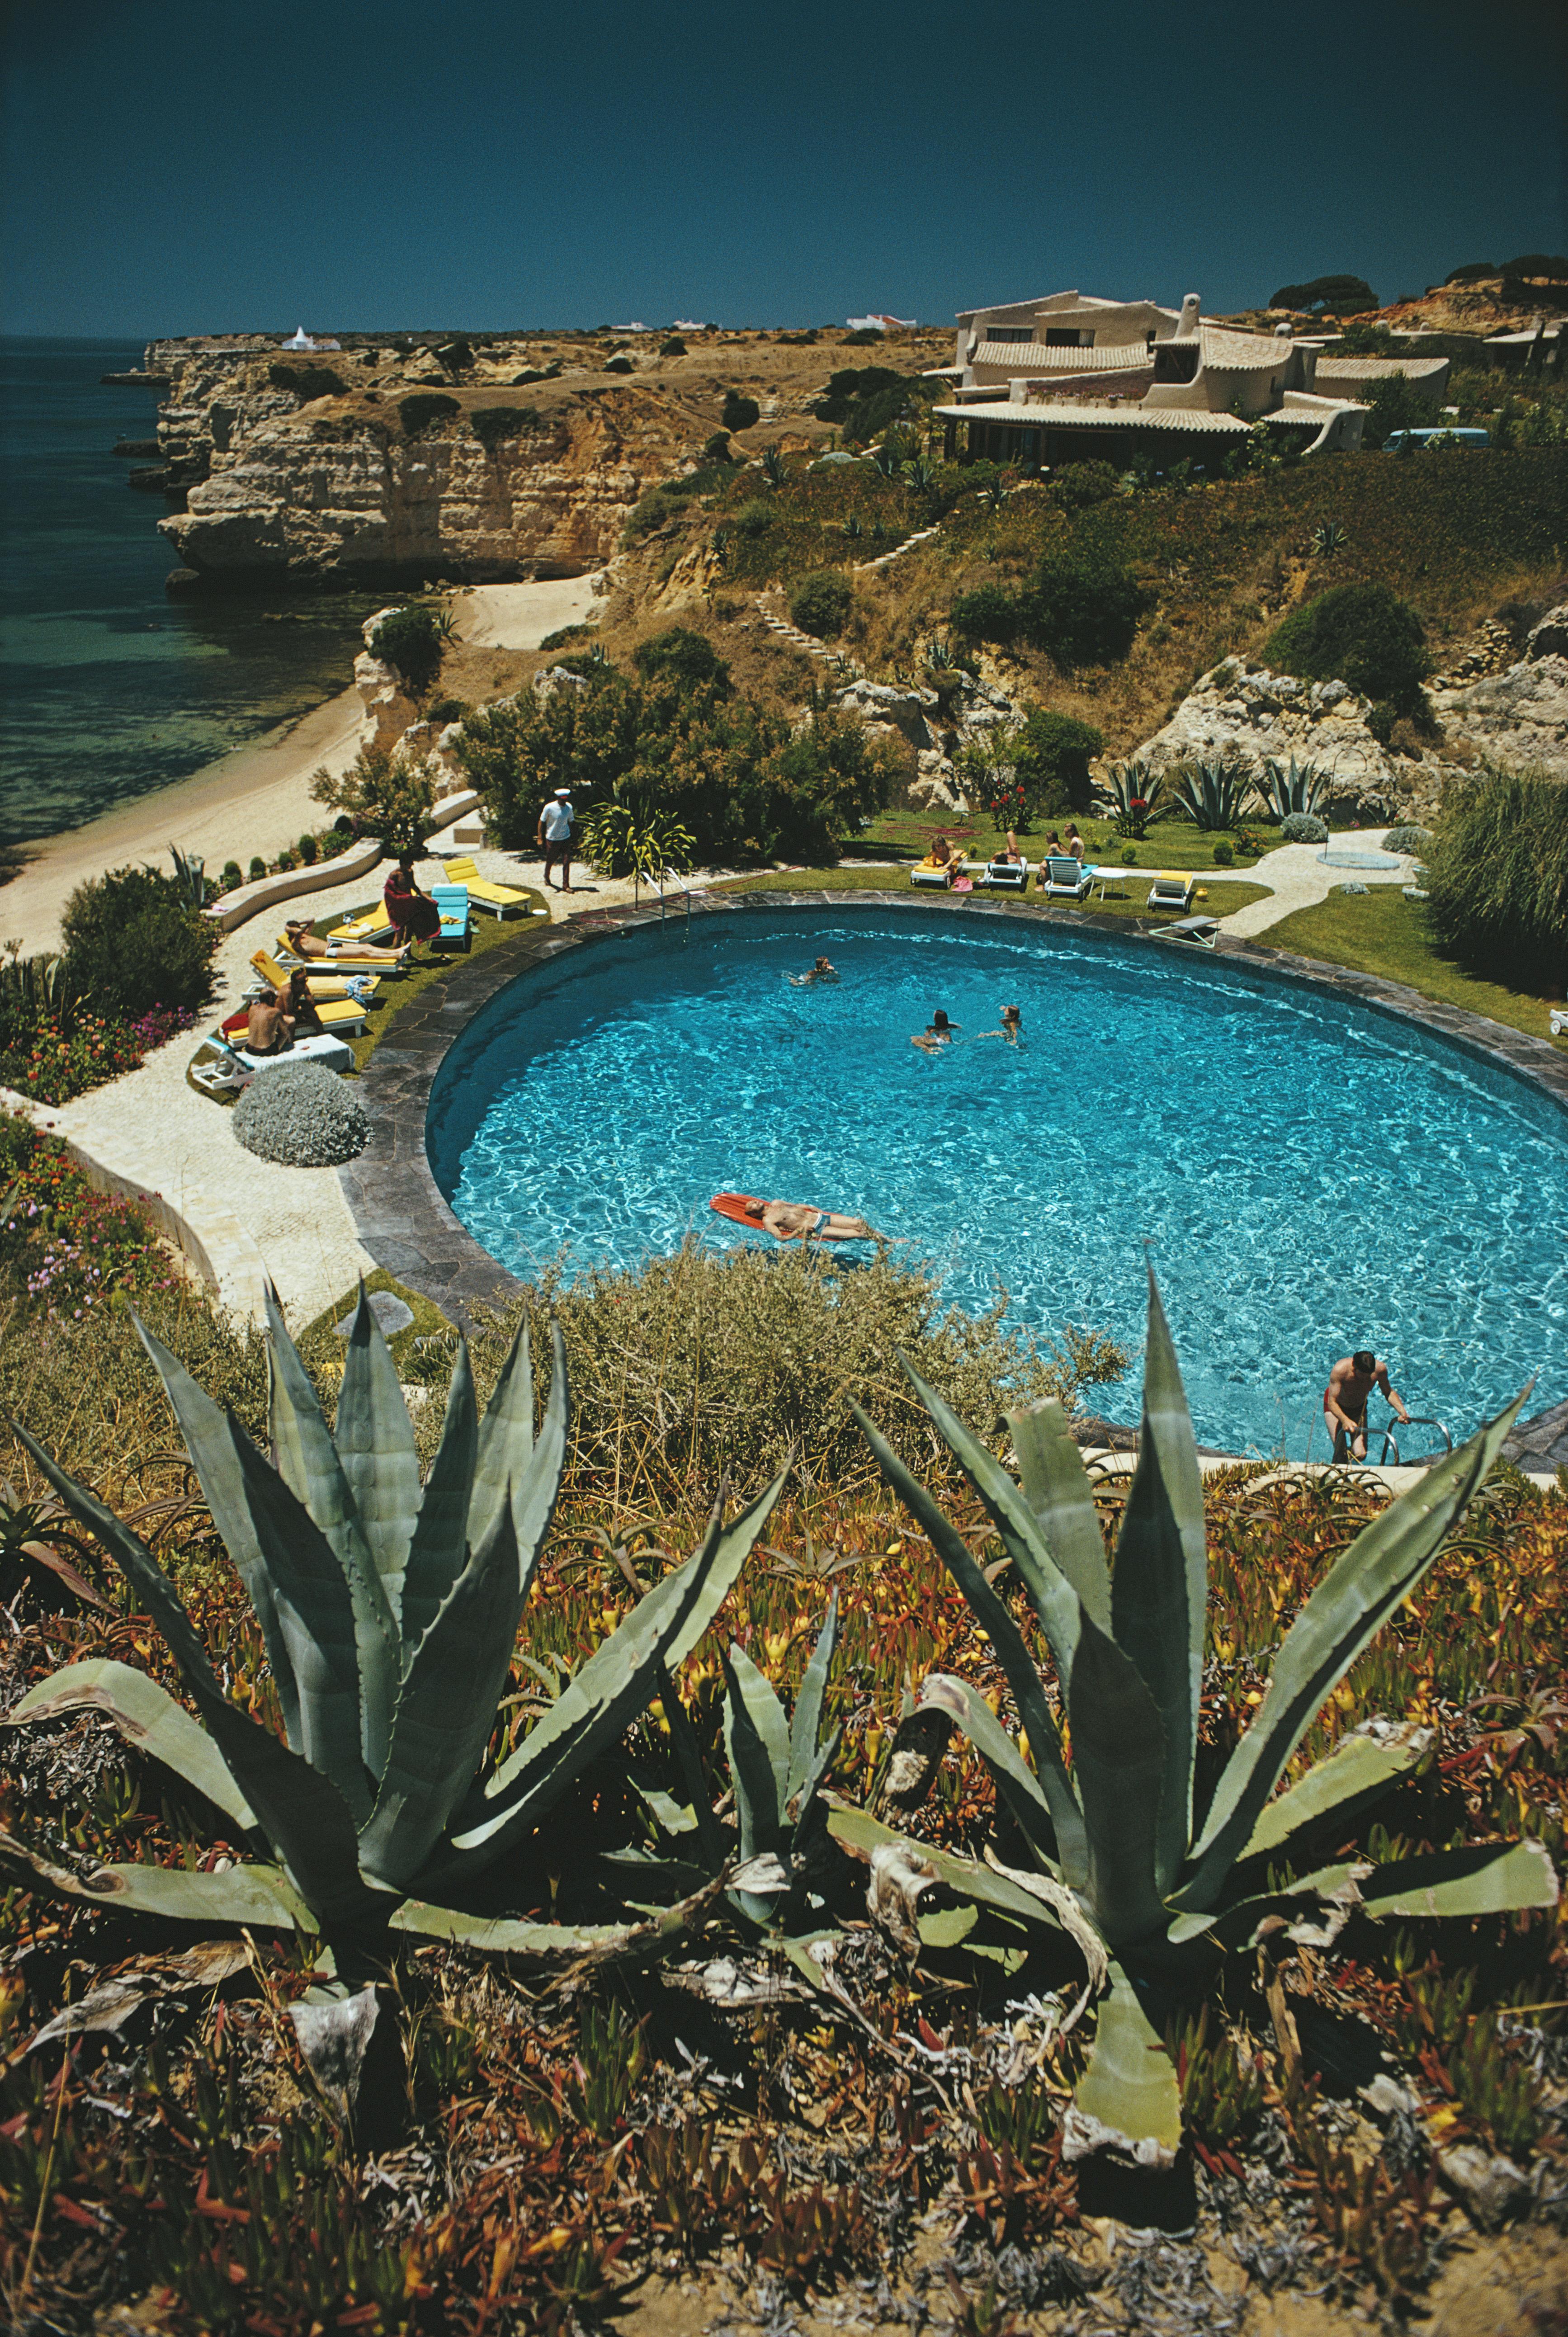 Algarve Hotel Pool
1970
Chromogenic Lambda Print
Estate edition of 150
Printed Later

Guests in the pool at the Algarve Hotel, the Algarve, Portugal, July 1970. (Photo by Slim Aarons/Getty Images)

Estate stamped and hand numbered edition of 150